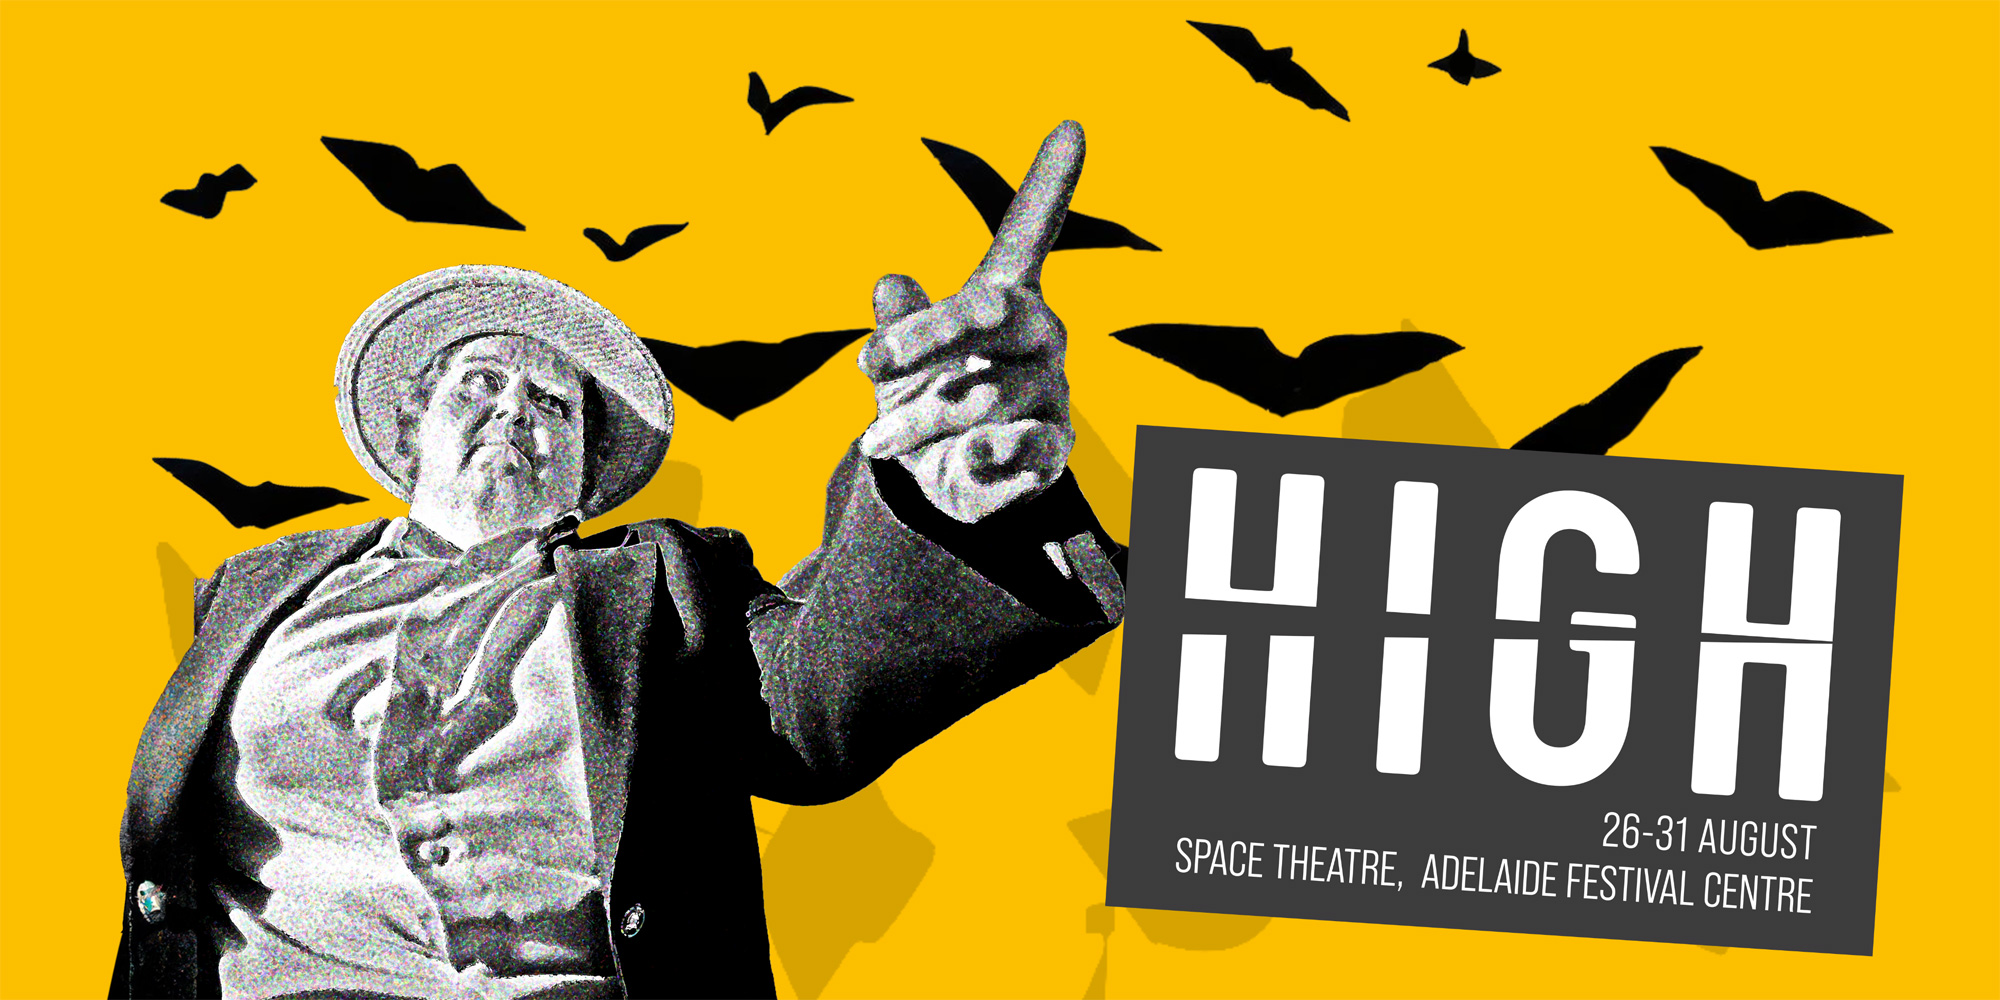 High - 26-31 August - Space Theatre, Adelaide Festival Centre